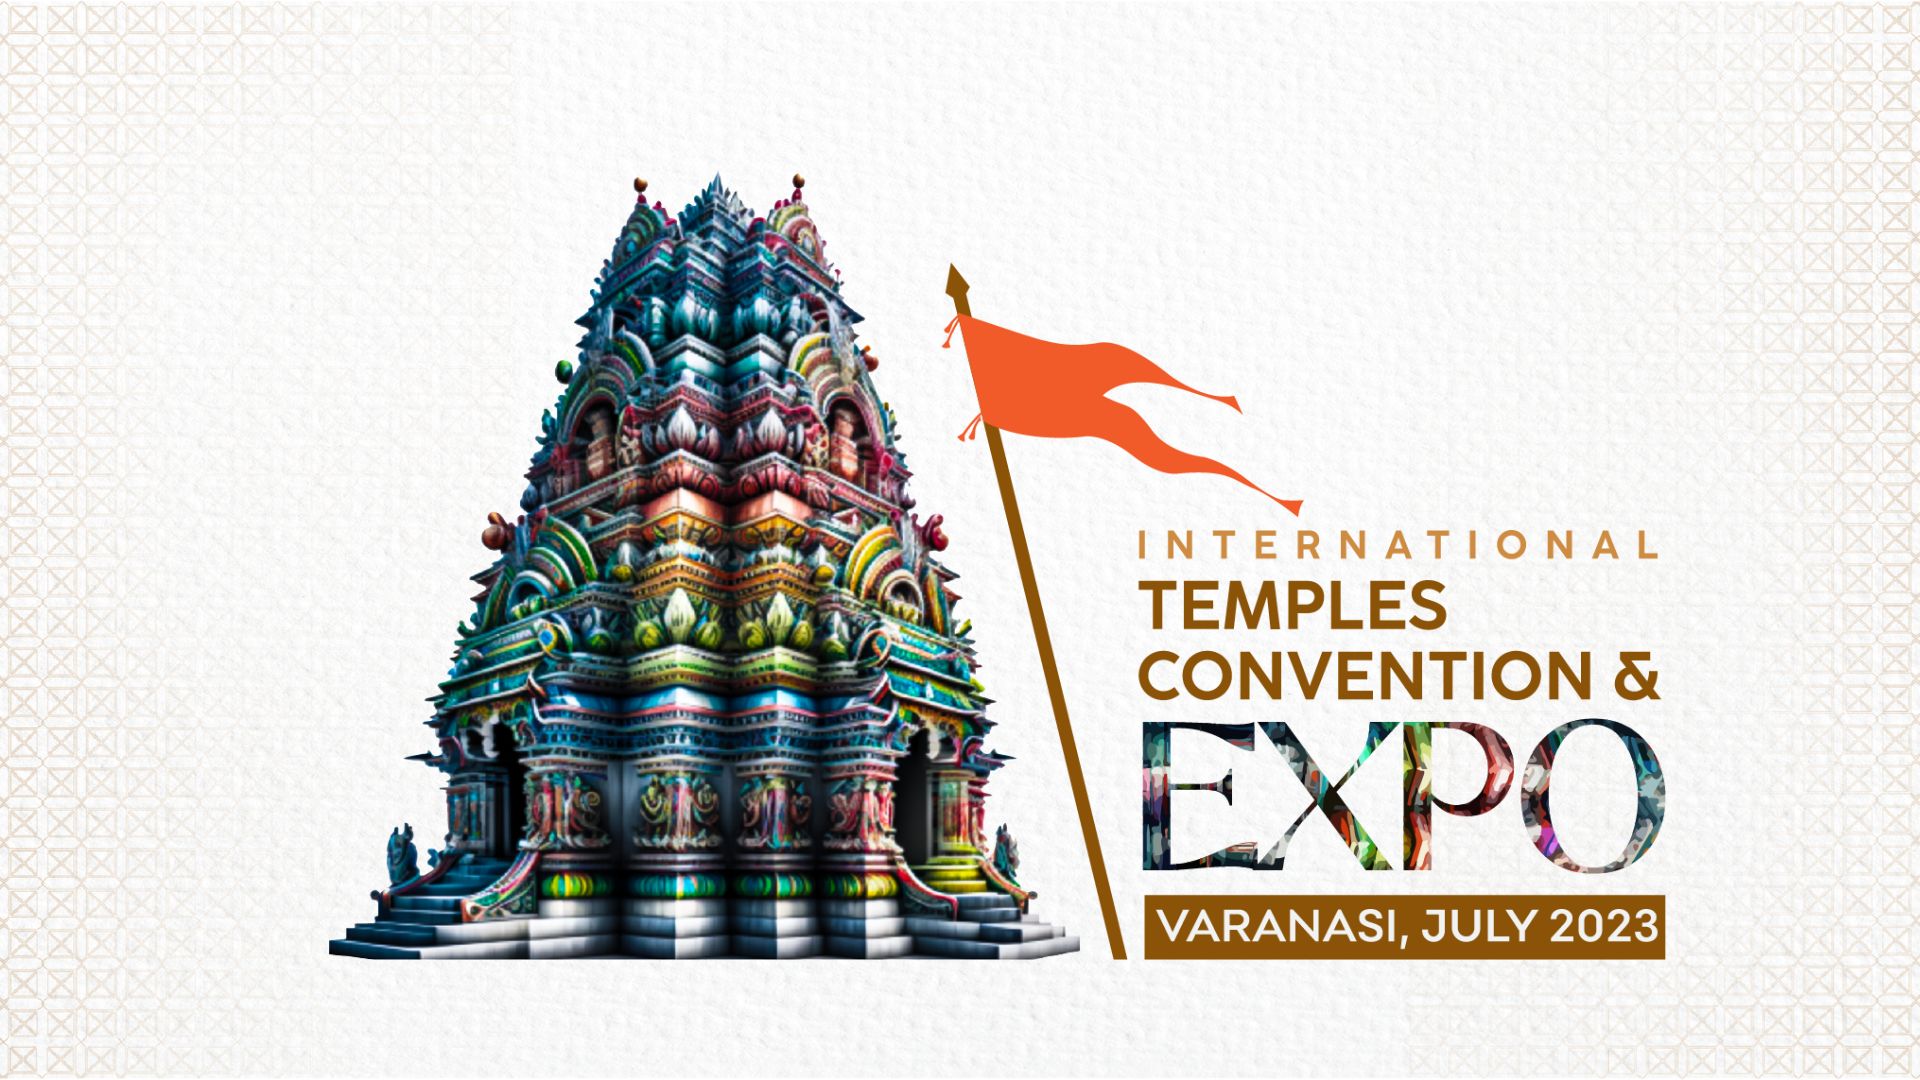 International Temples Convention 2023